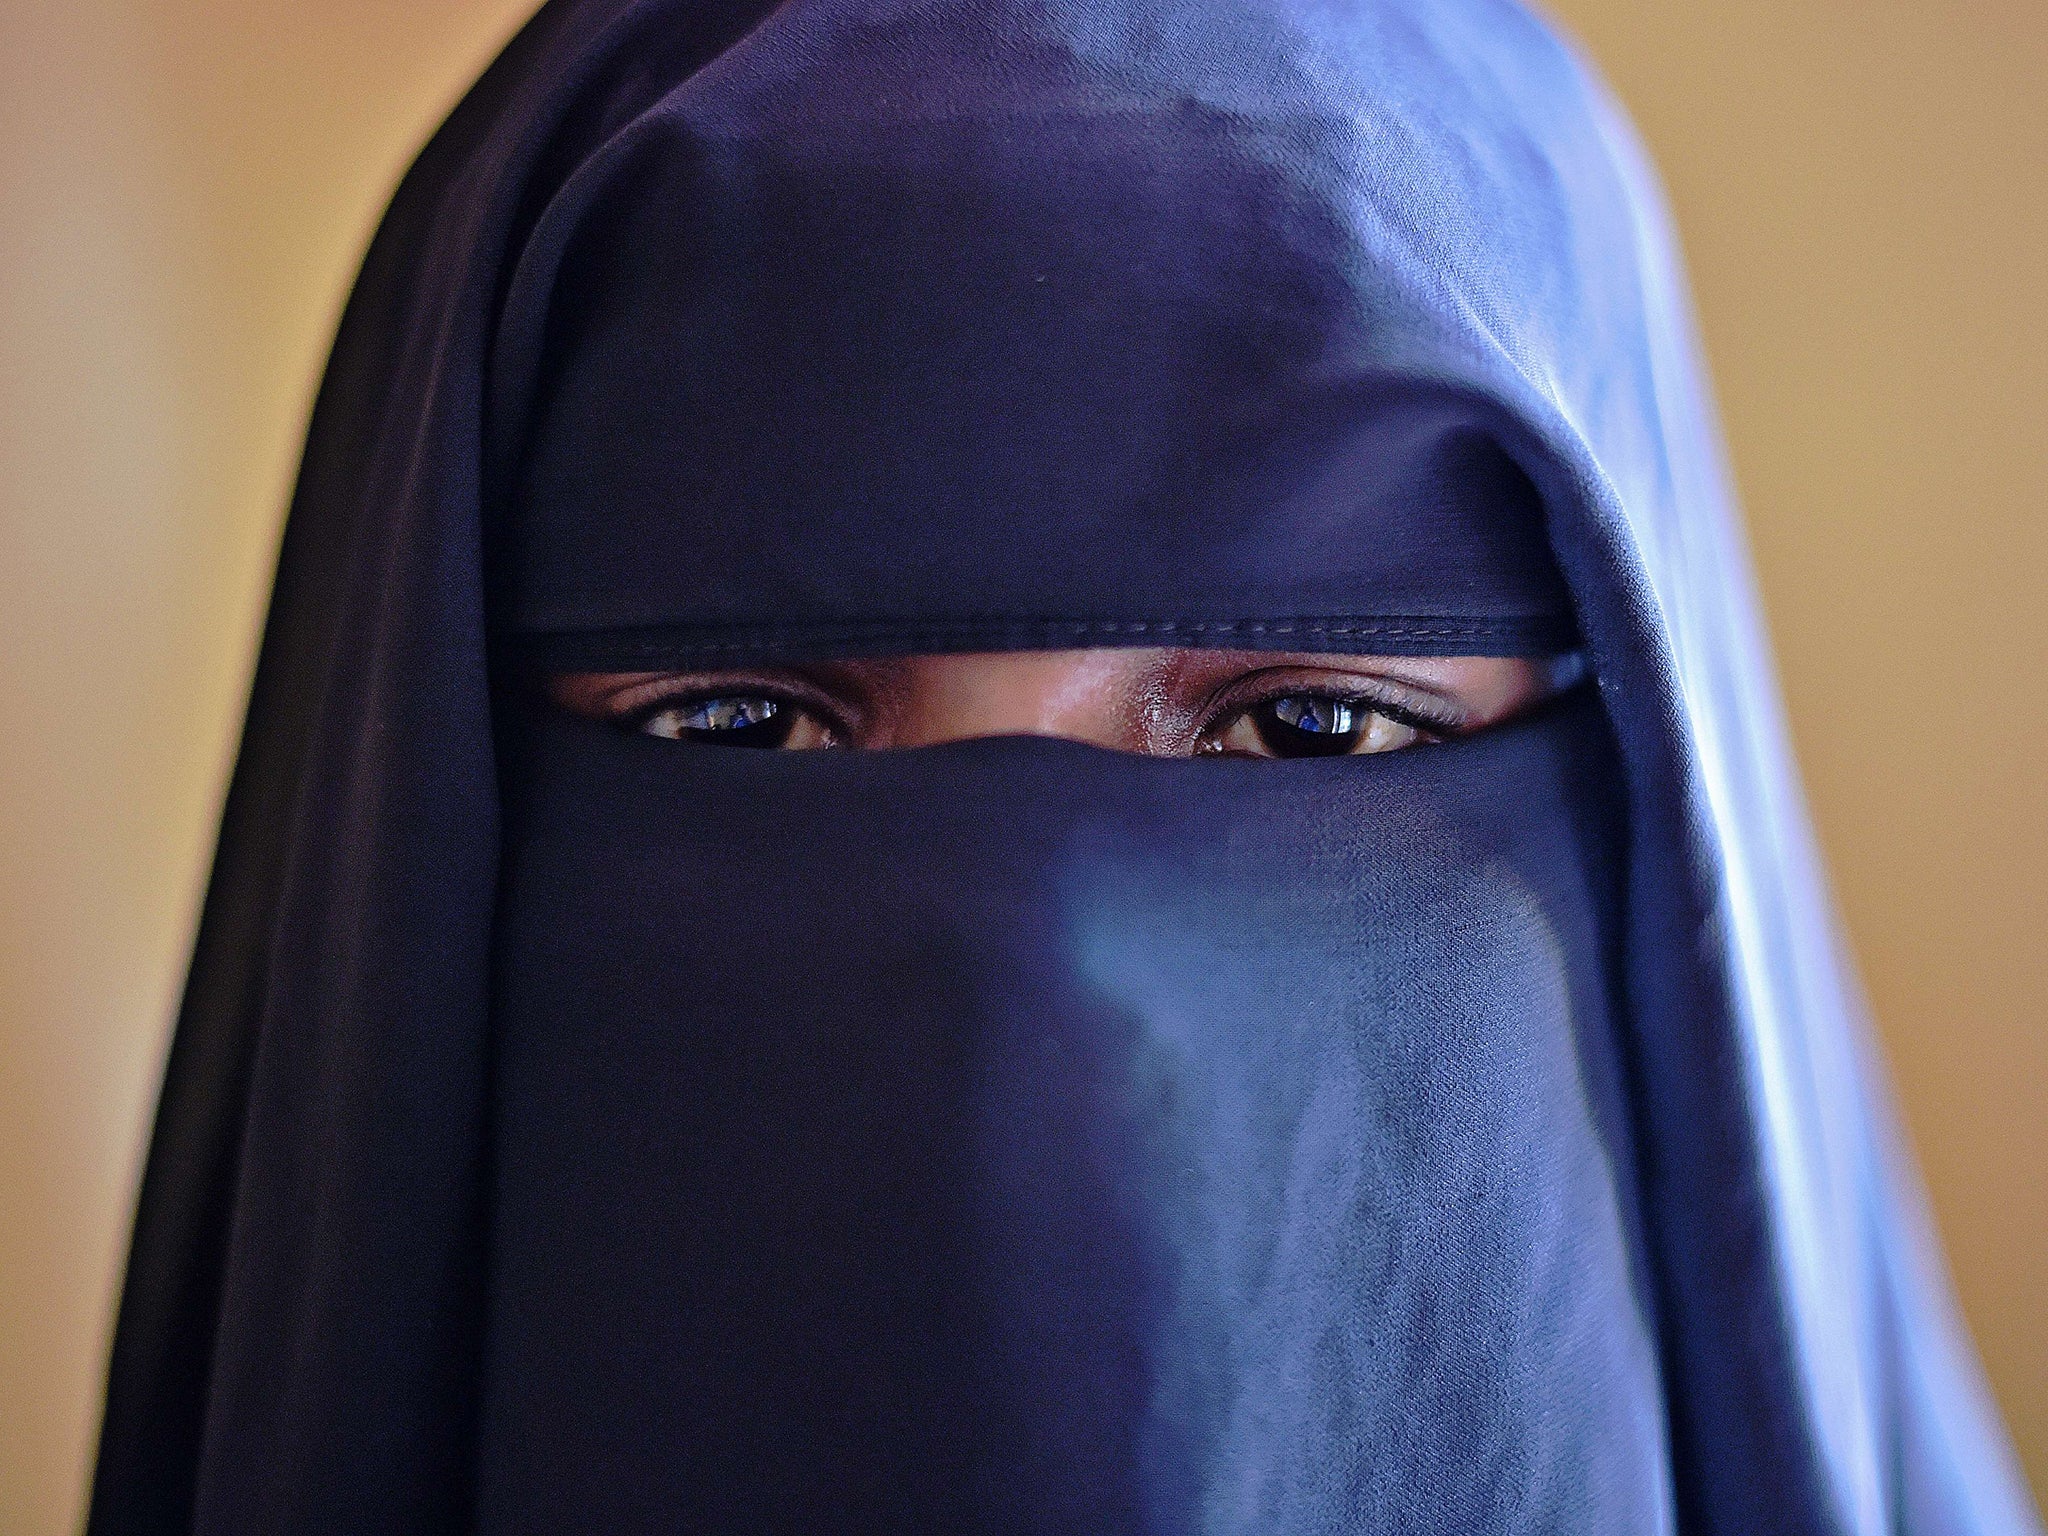 Last year a report from Human Rights Watch revealed that rape was considered “normal” in Somalia